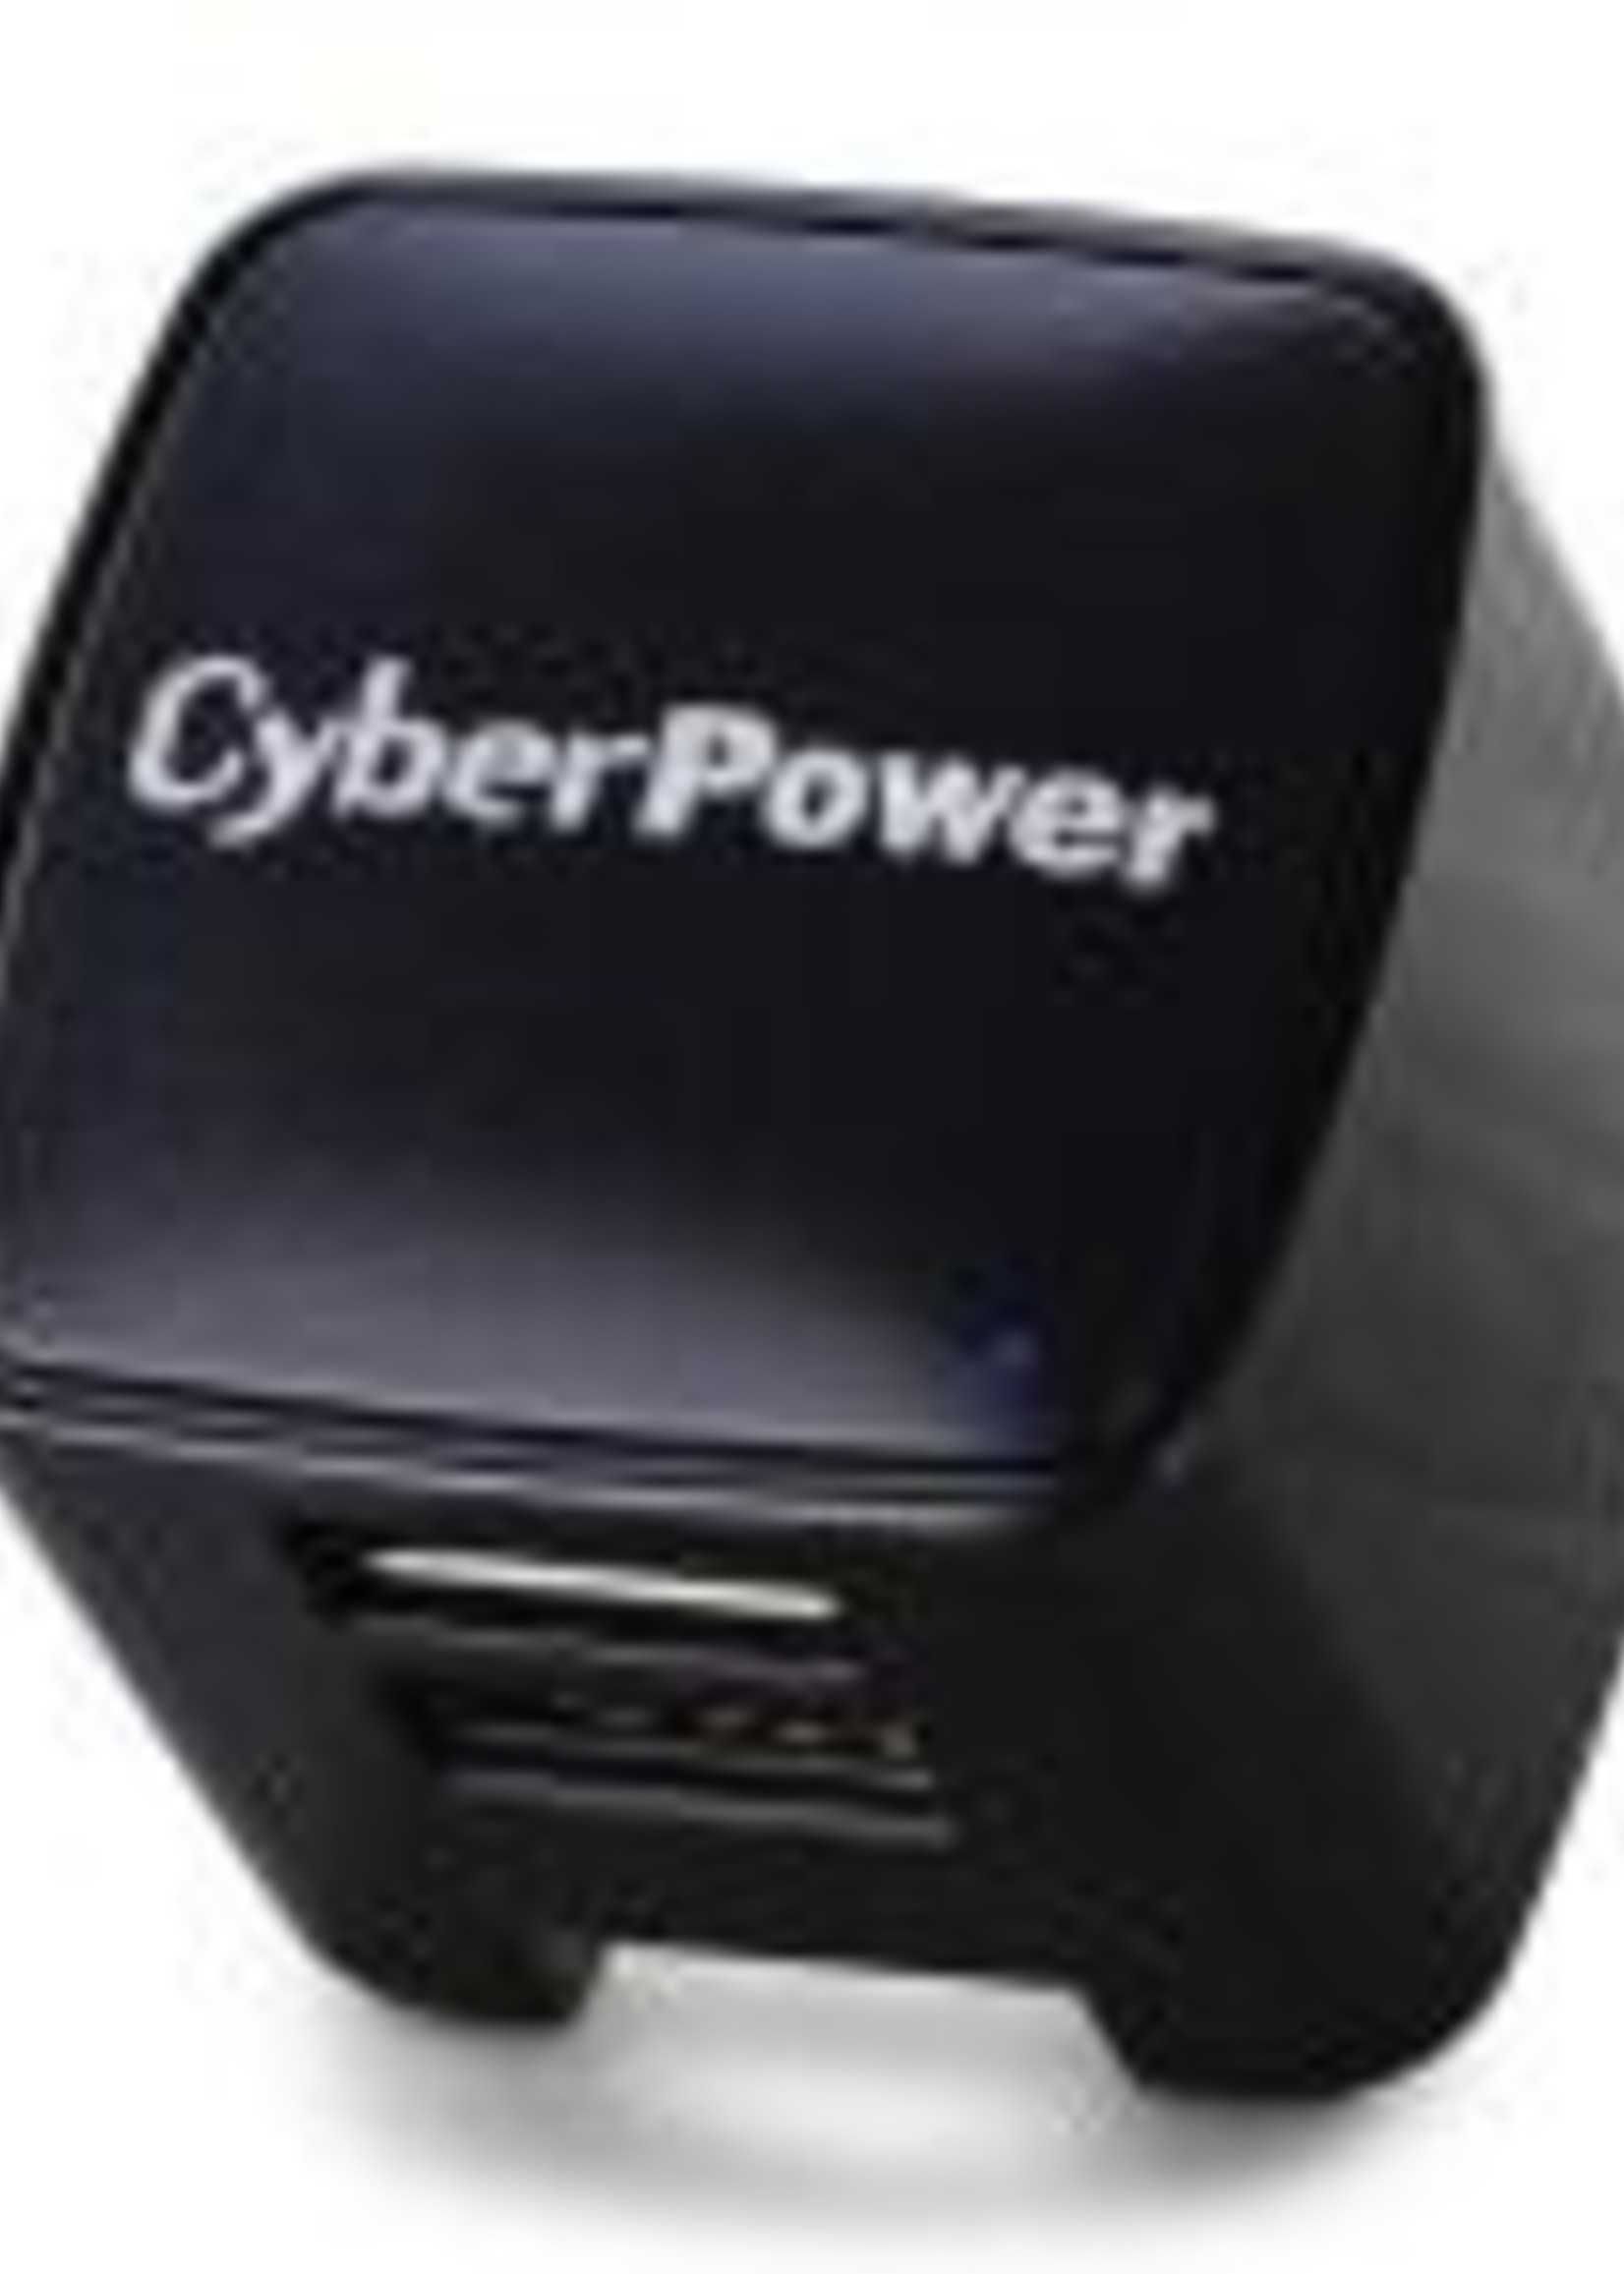 CyberPower 2Pt USB 3.1A Wall Charger